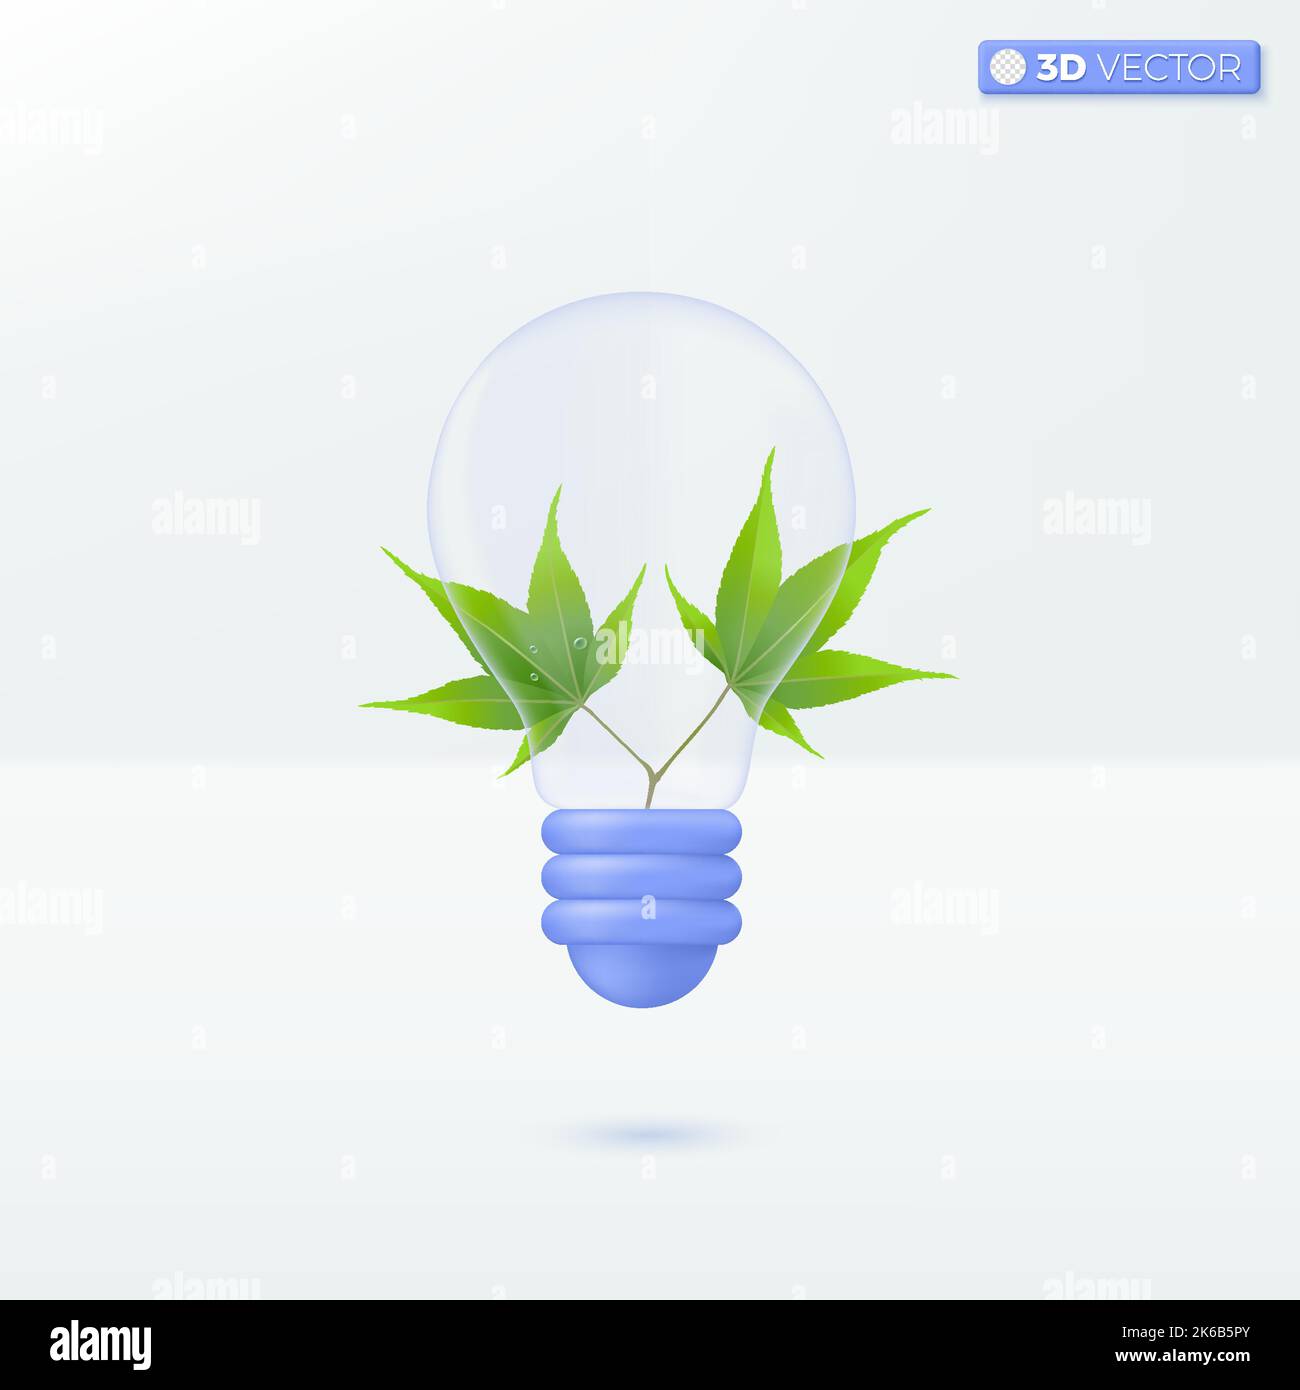 Light bulb transparency and green meple. develop environment, ecology, idea metaphor. 3D vector isolated illustration design Cartoon pastel Minimal st Stock Vector